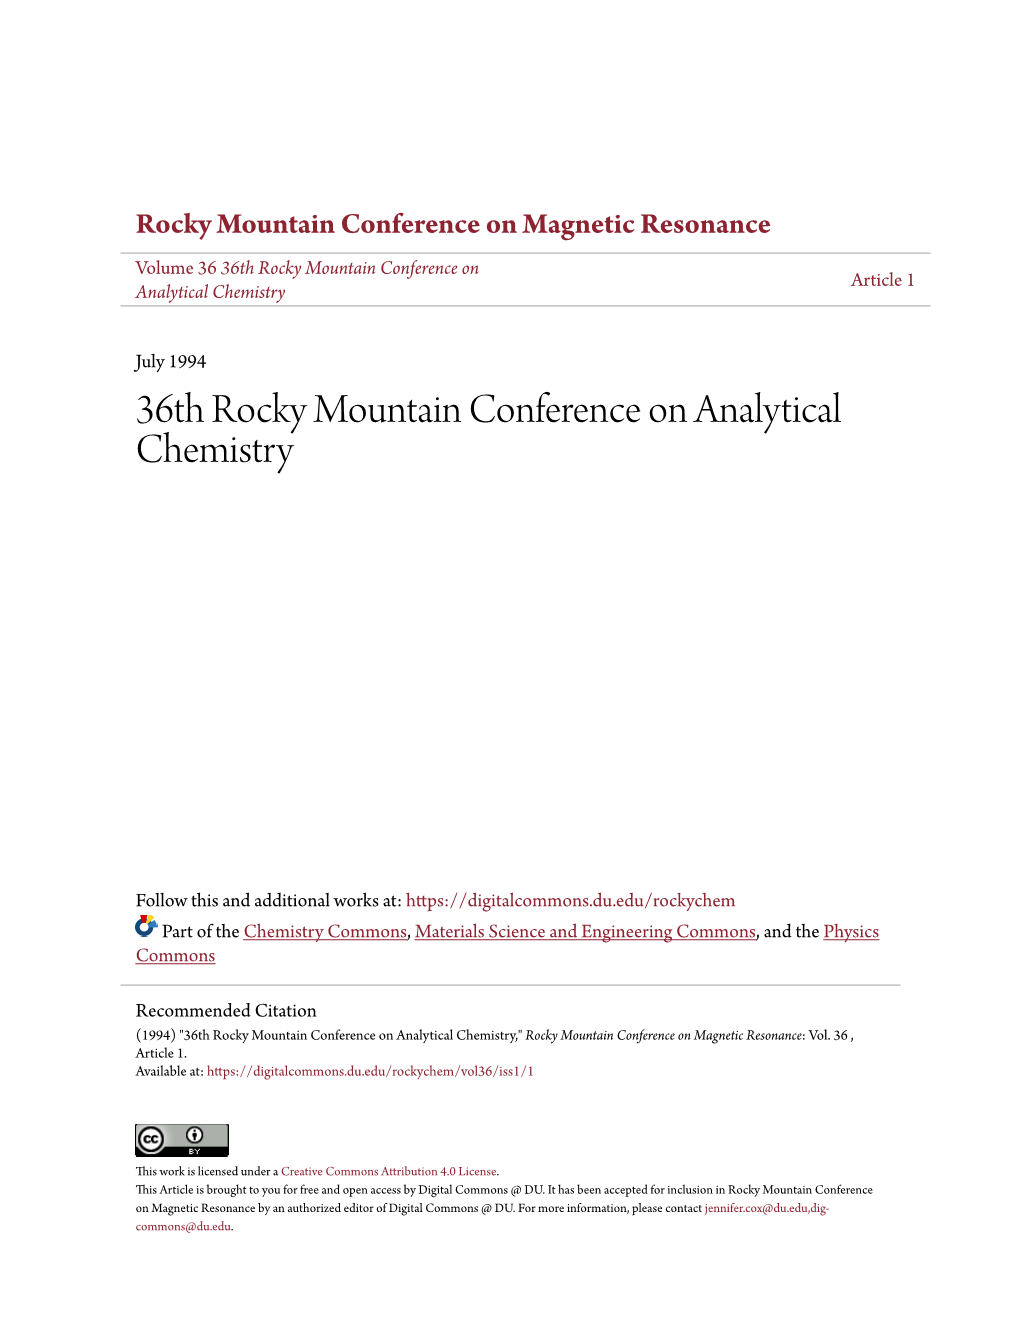 36Th Rocky Mountain Conference on Analytical Chemistry